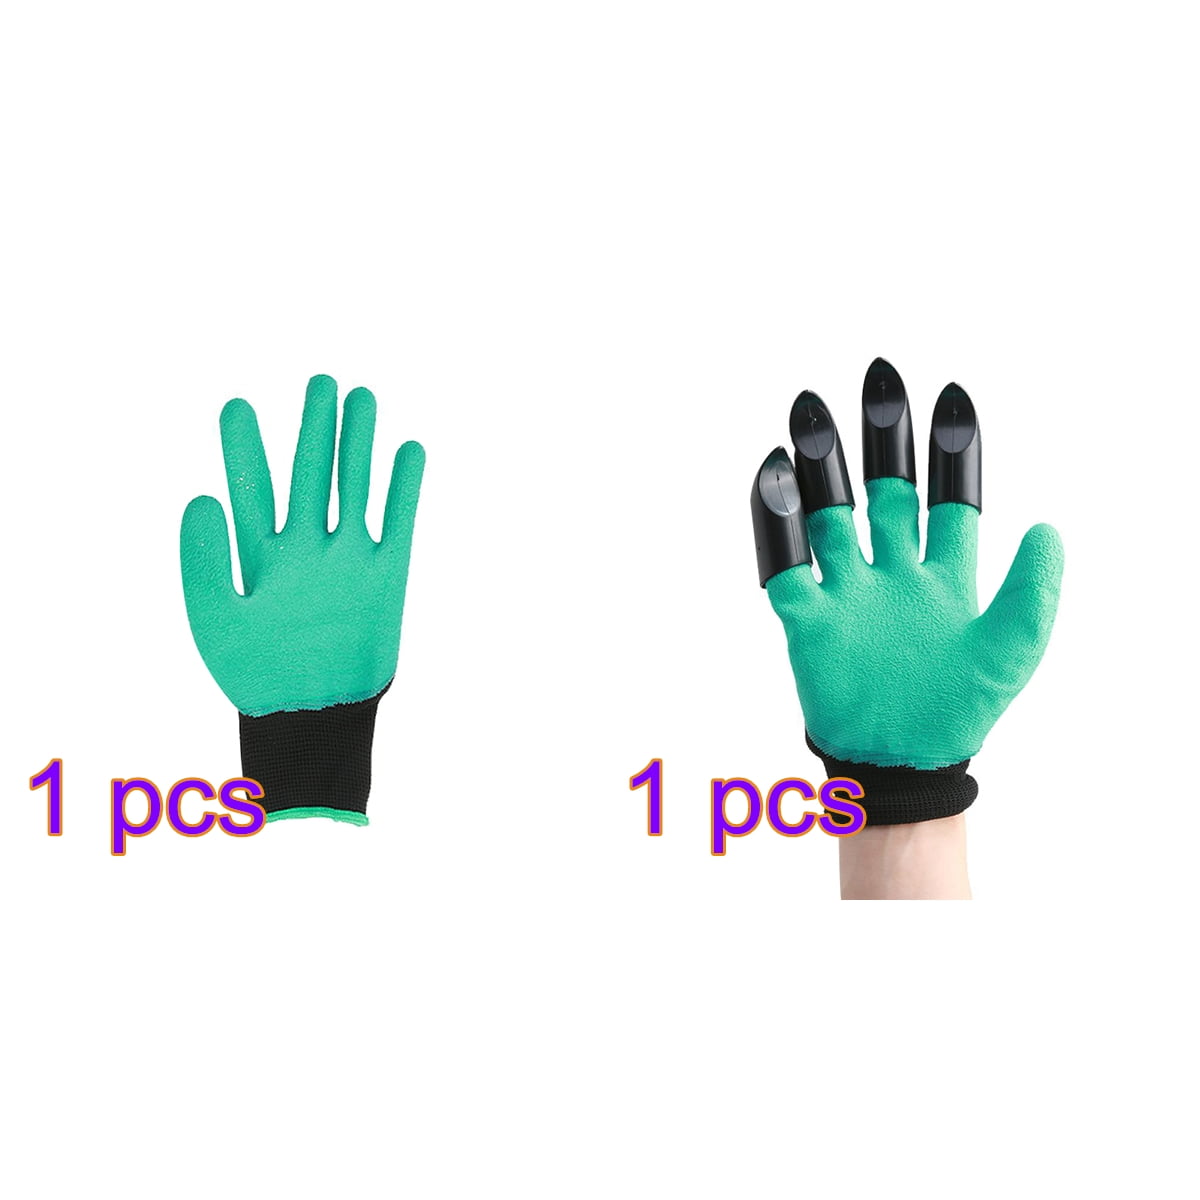 1Pair For Garden Gloves Digging Planting 8Pcs ABS Plastic Claws Gardening Gloves 